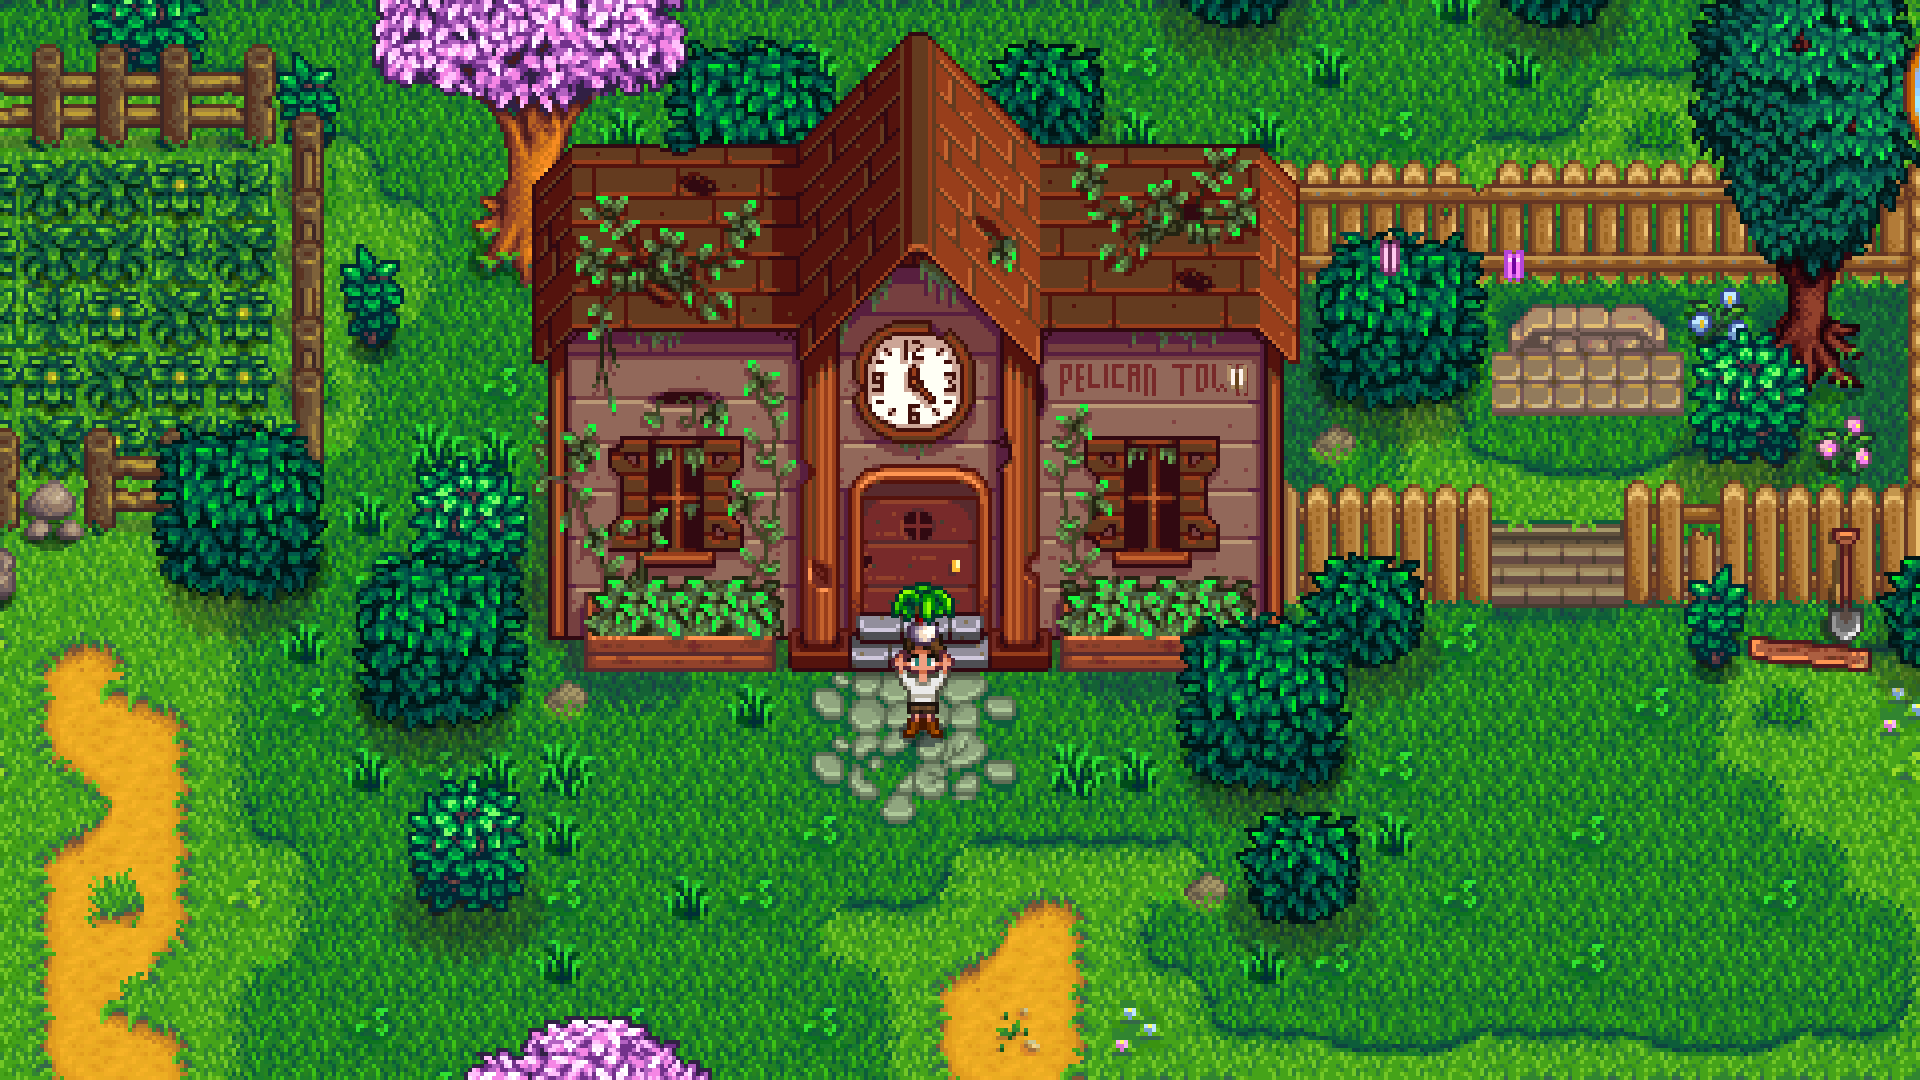  Stardew Valley 1.6 'adds so much stuff to all the different aspects of the game', teases creator 